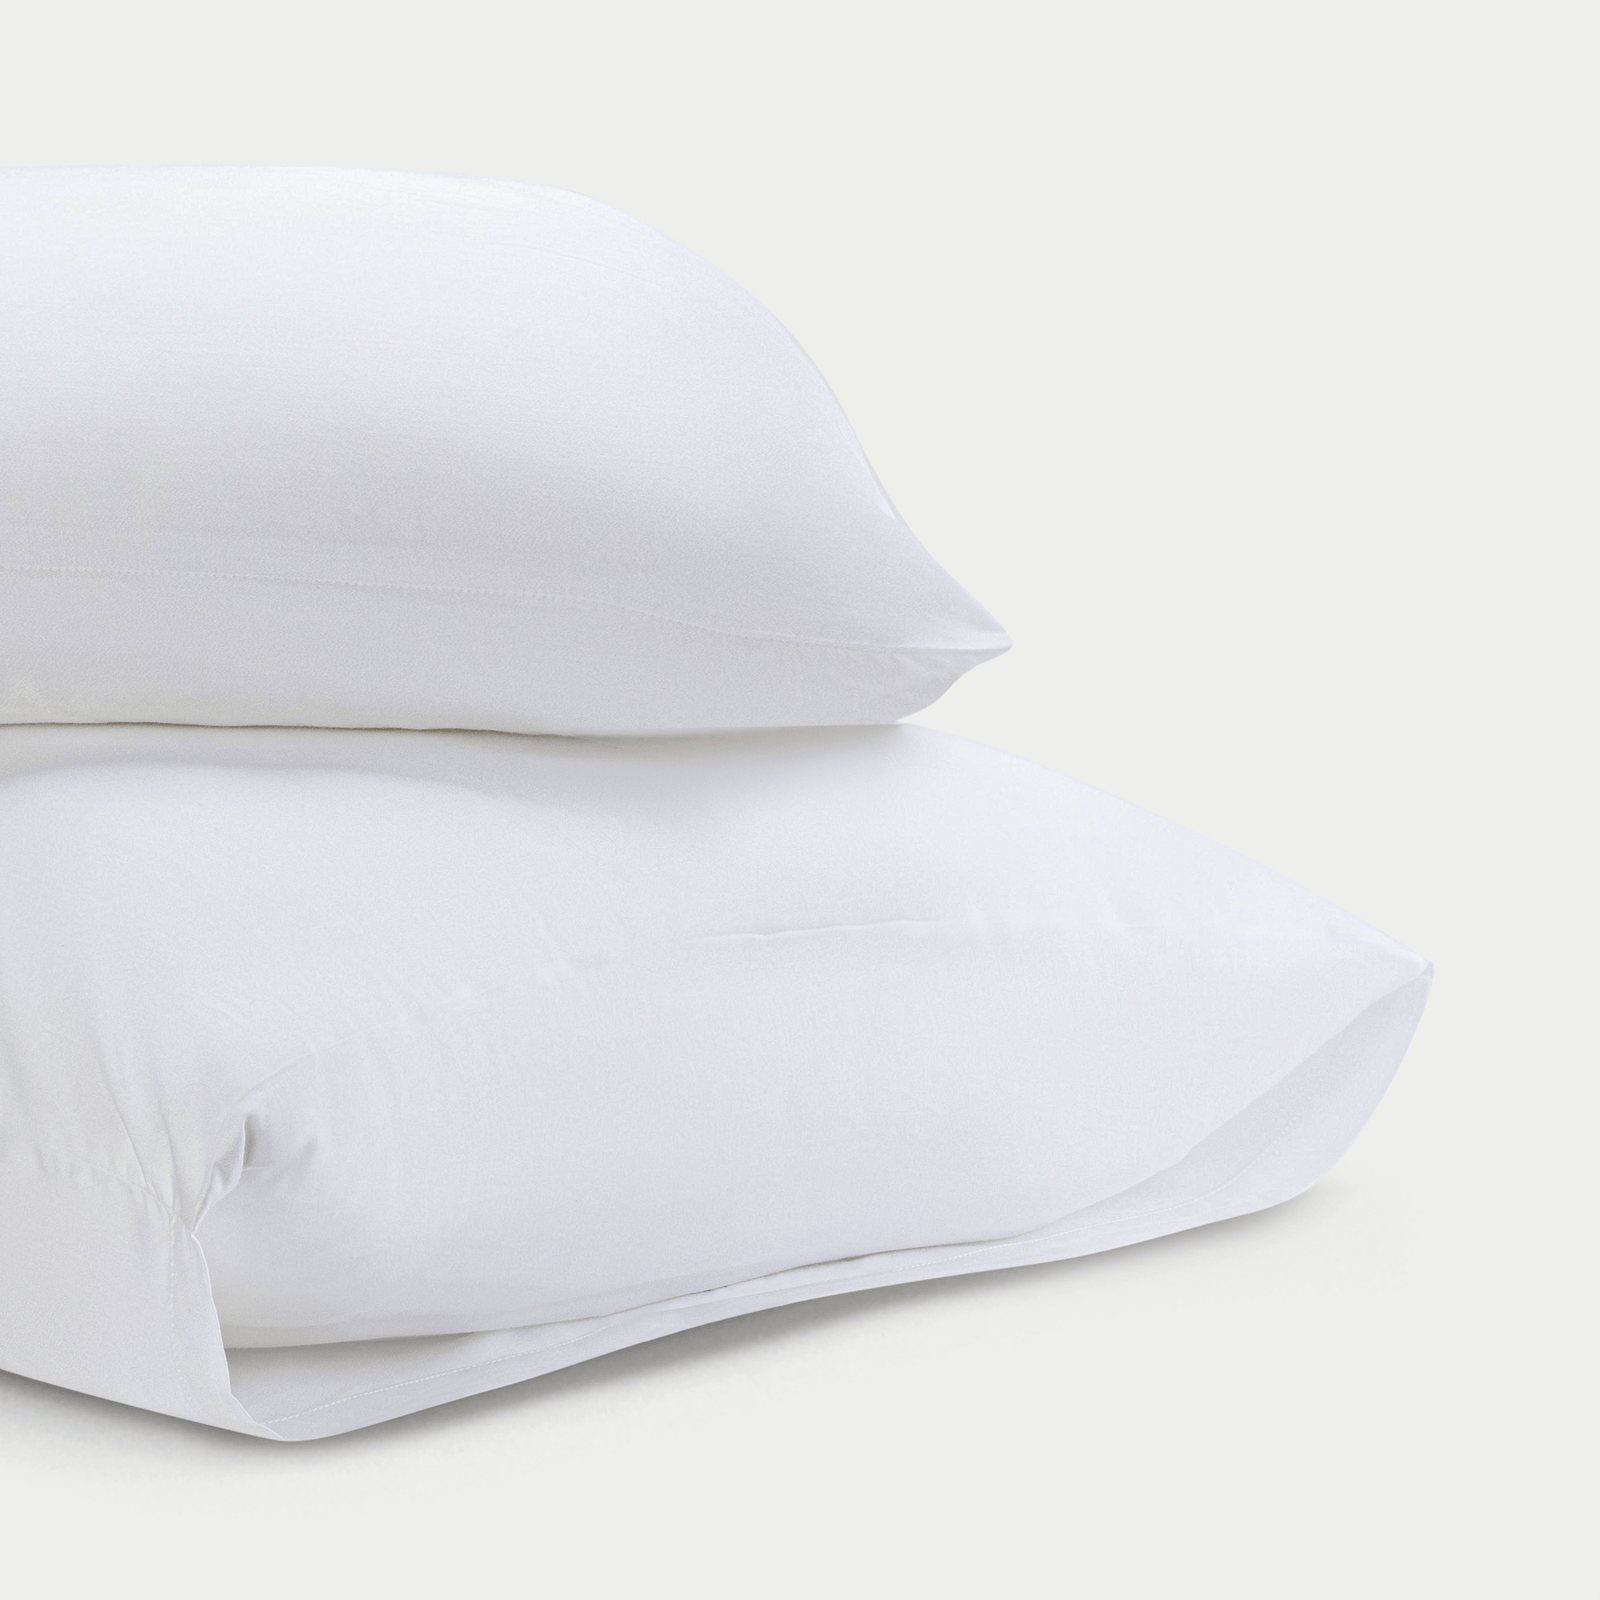 Two standard/king white pillowcases with plain background